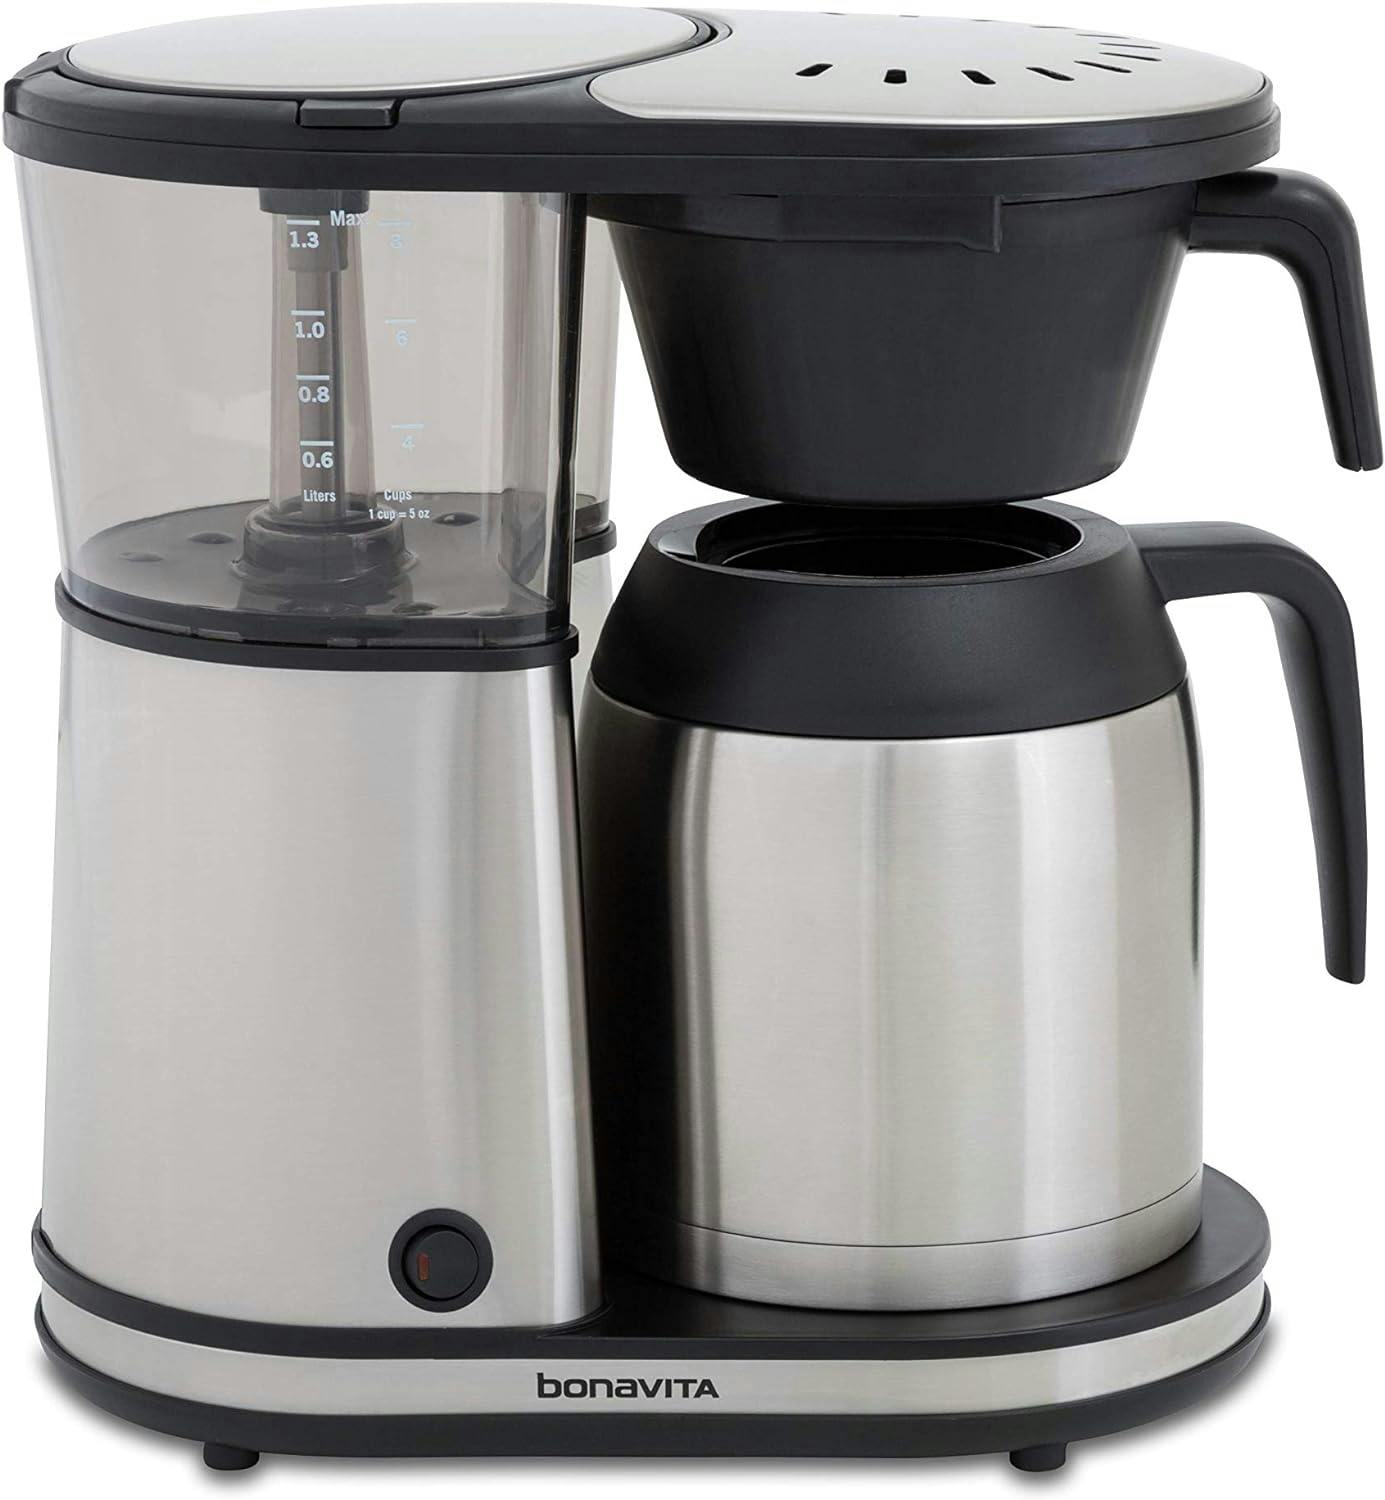 Elevate 8-Cup Stainless Steel Thermal Carafe Drip Coffee Maker